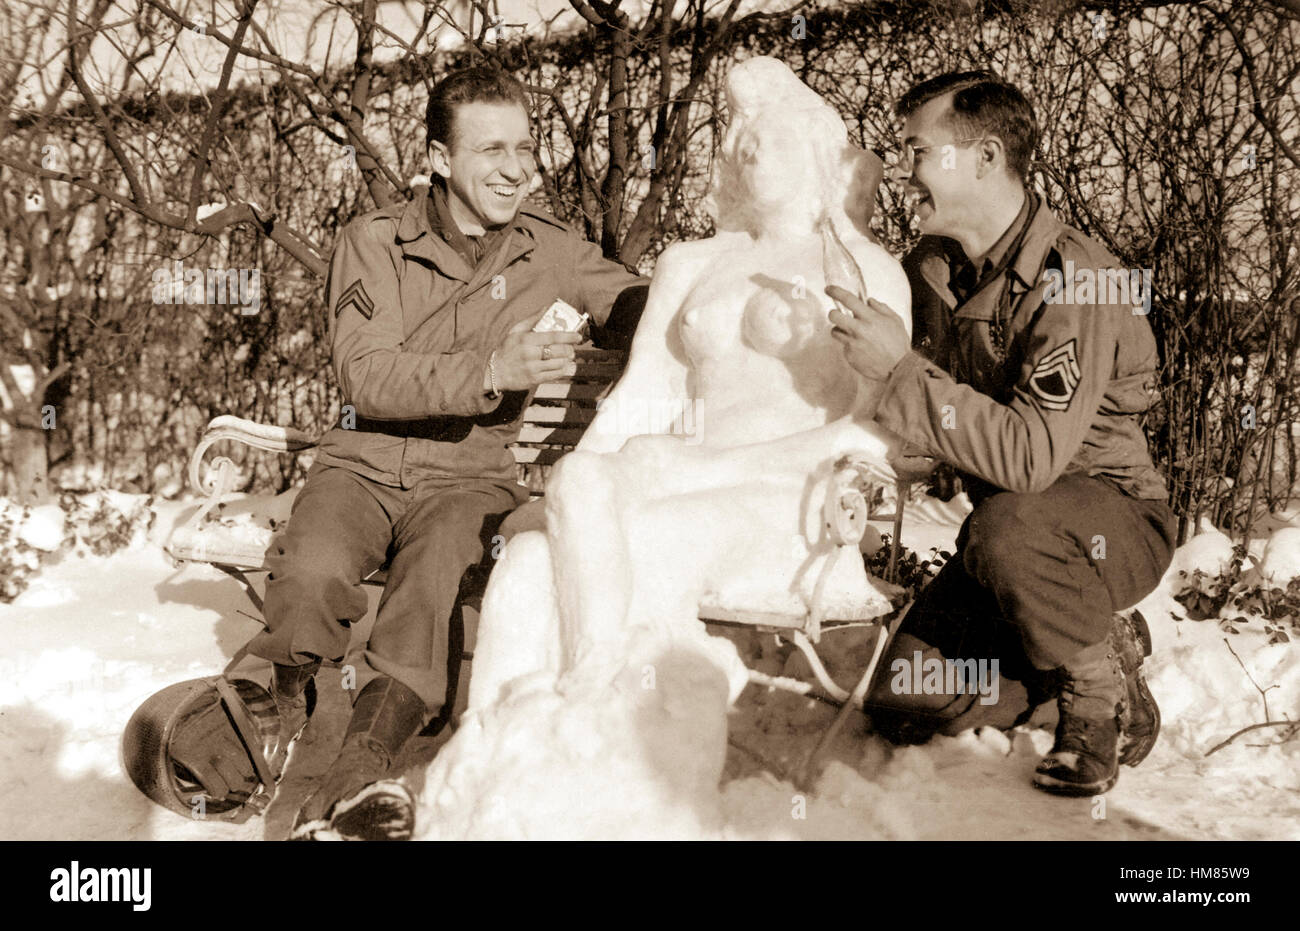 Cpl. Bernard Butnik, Cleveland Heights, Ohio, and Sgt. Richard Goodbar, Russellville, Ark., offer 'Anges' their snow woman, cigarettes and a 'coke.'  European theater. January 14, 1945. Sgt. G. W. Herold. (Army) NARA FILE #:  111-SC-198675 WAR & CONFLICT #:  893 Stock Photo